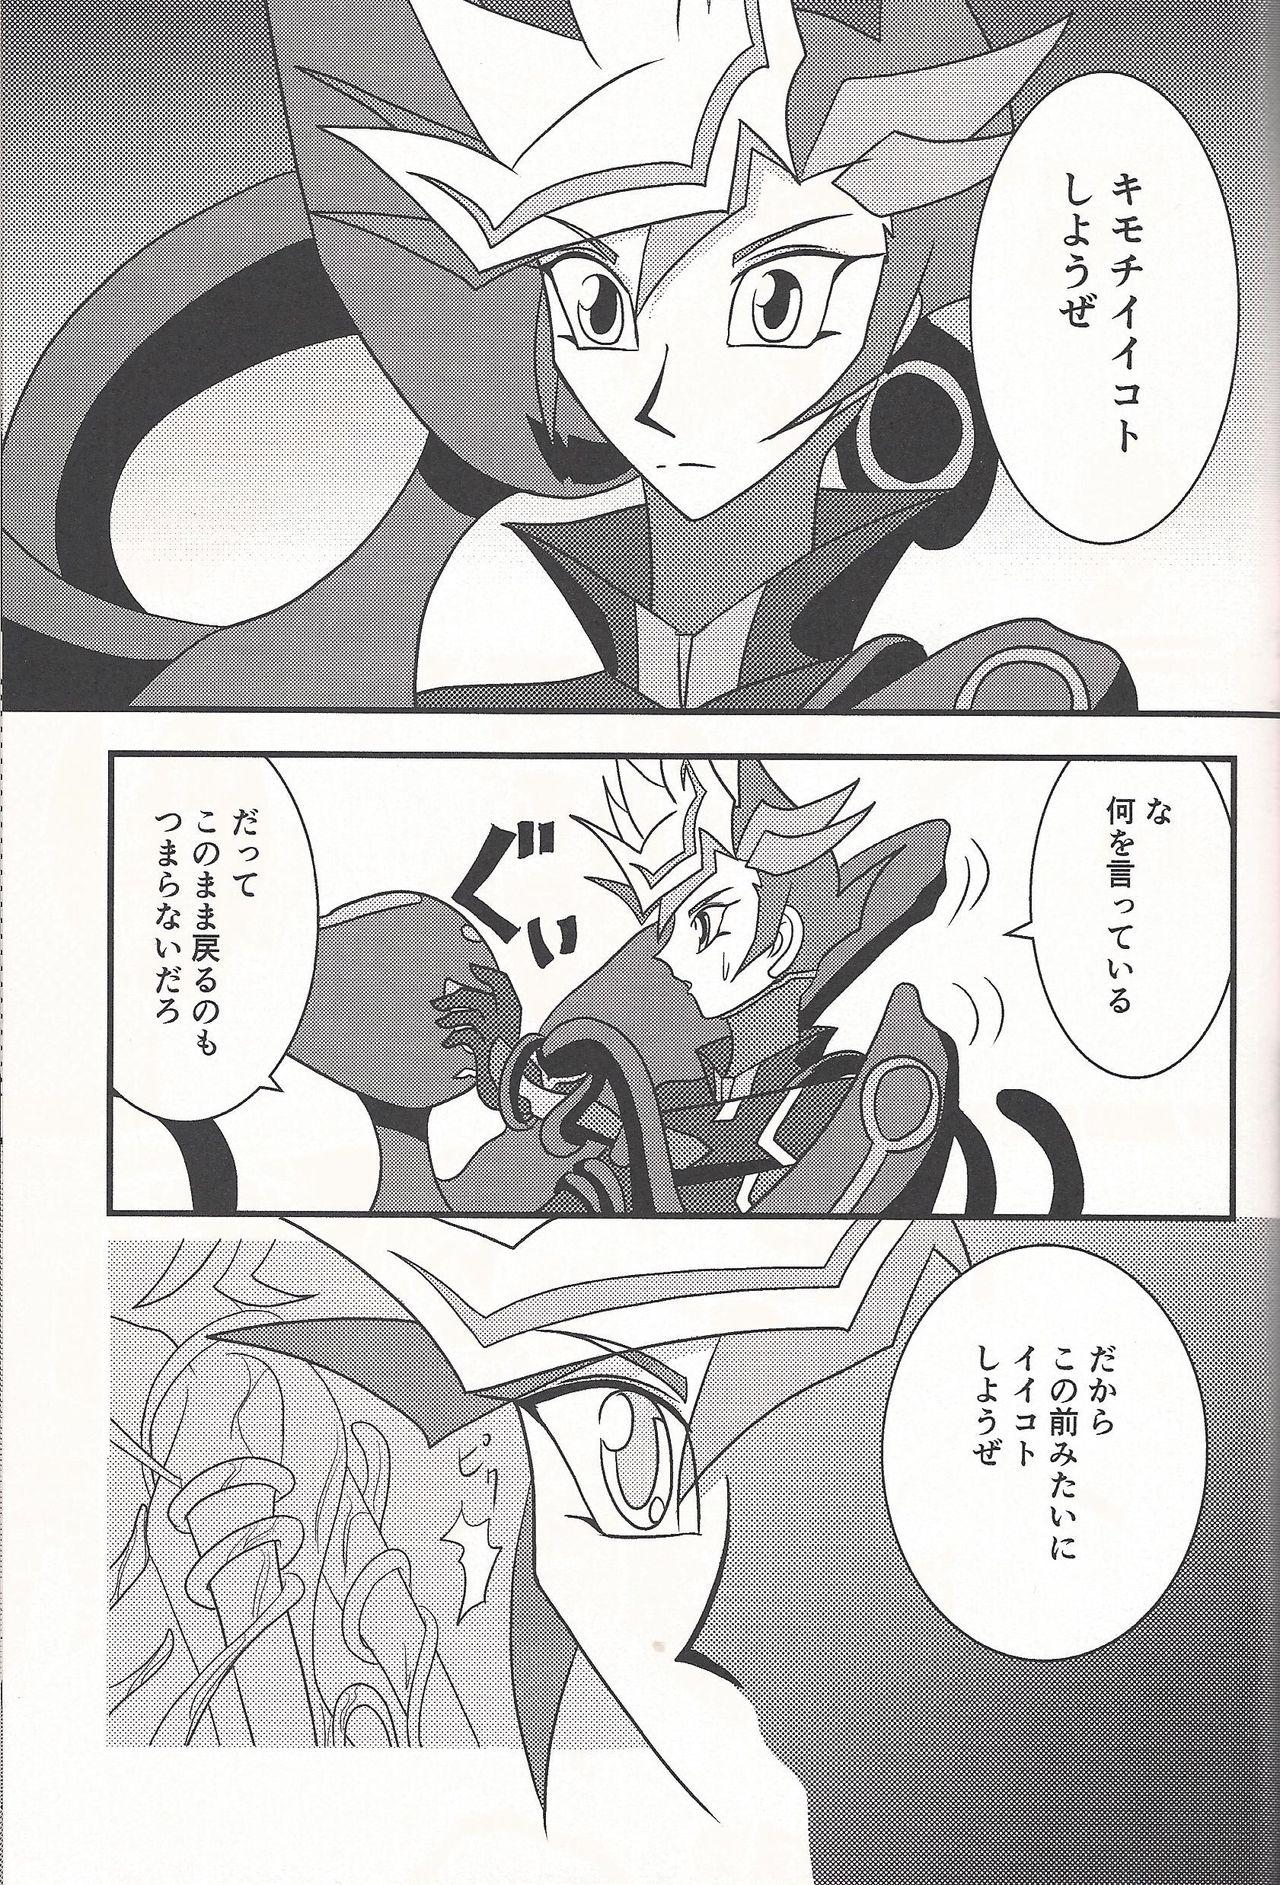 Girlfriends Mirrors gate - Yu gi oh vrains Juicy - Page 6